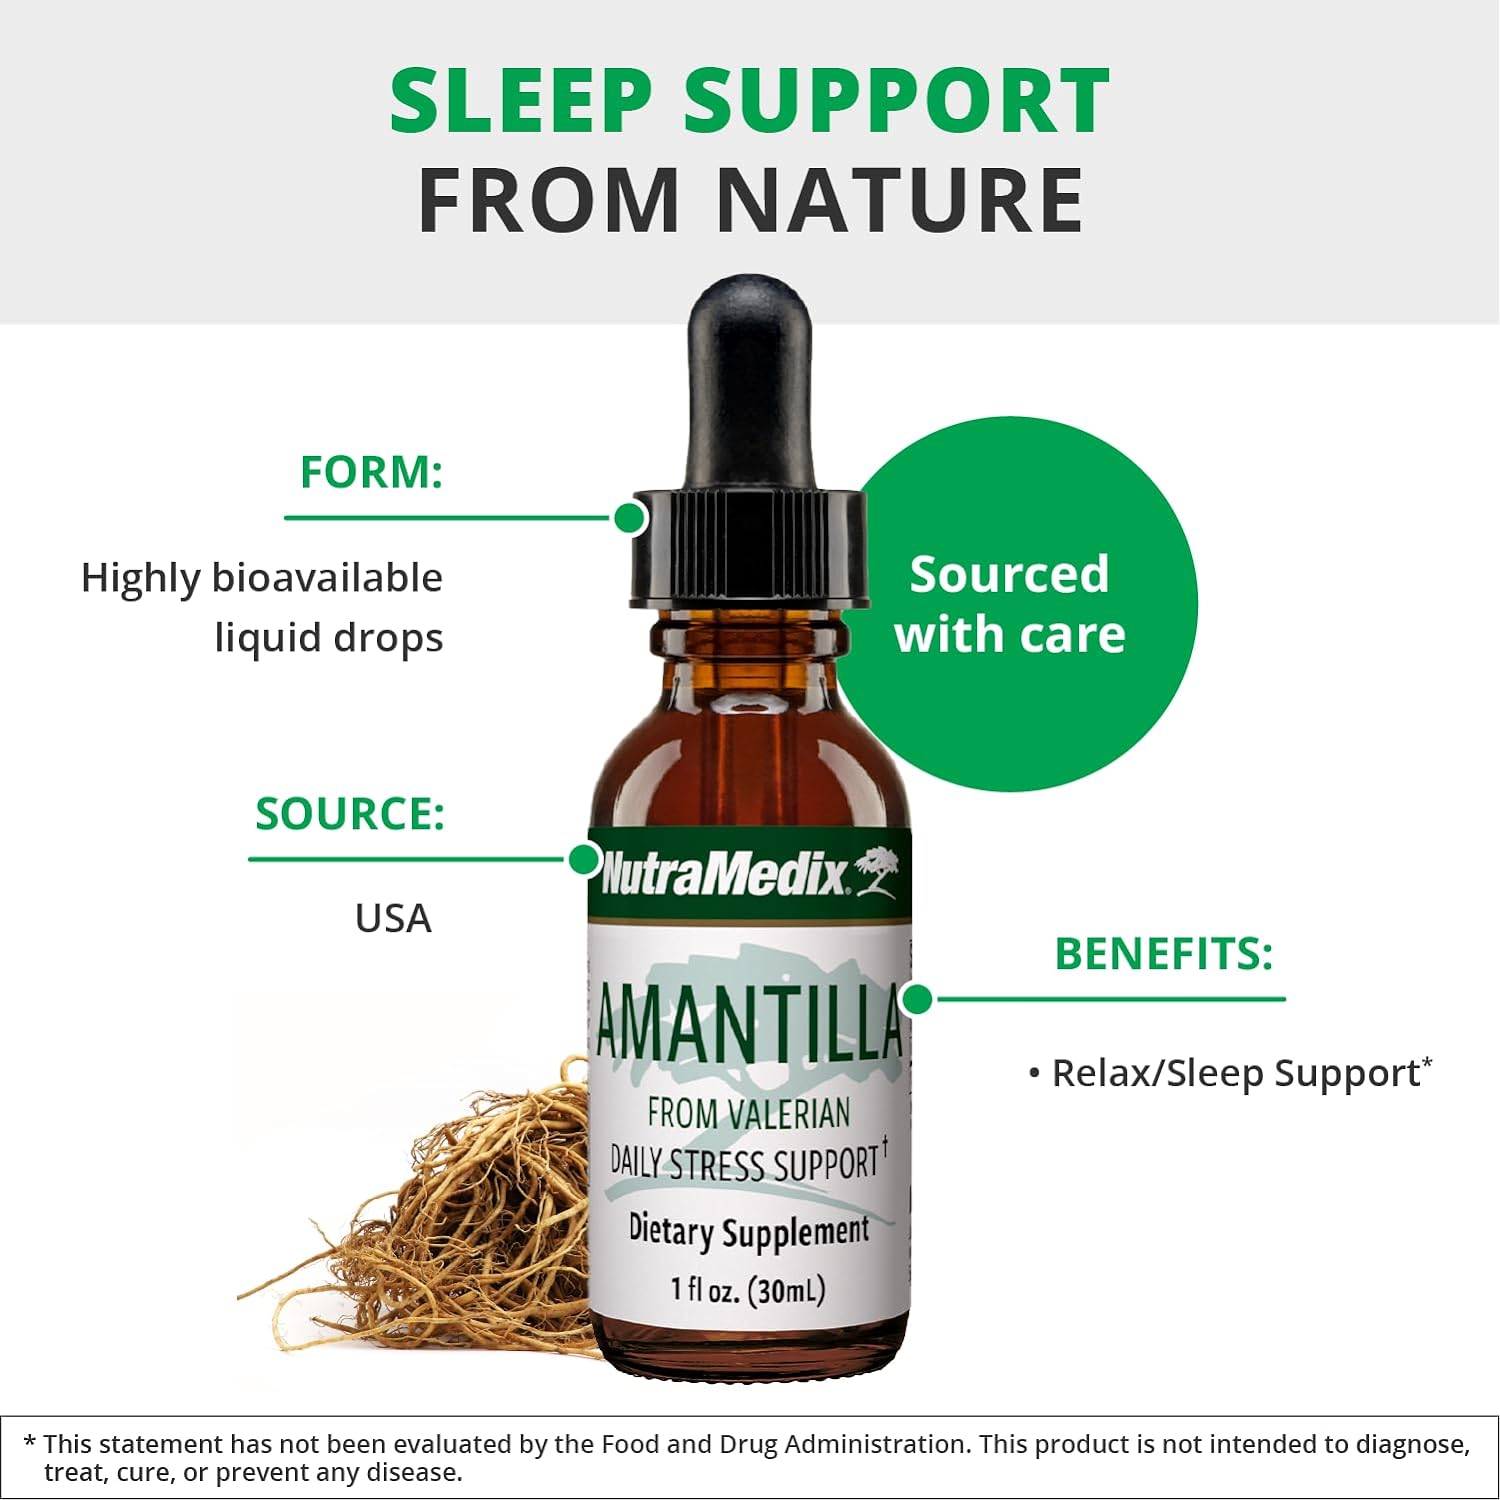 NutraMedix Amantilla Tincture - Valerian Root Extract for Stress Suppo